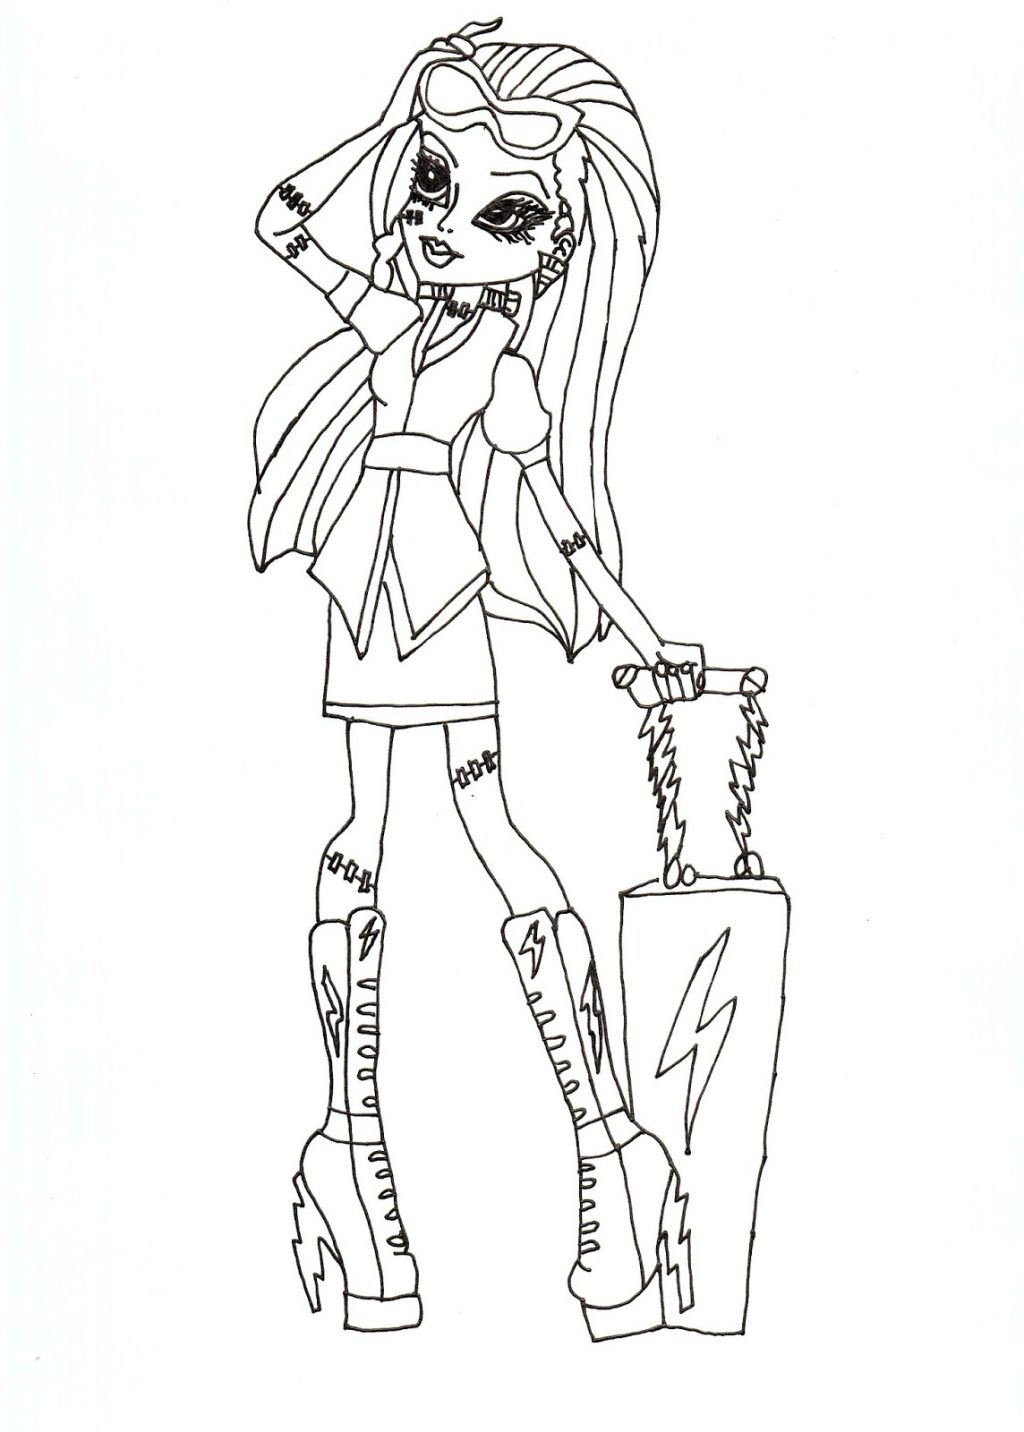 Coloring Ideas : Free Printable Monster High Coloring Pages For Kids - Monster High Free Printable Pictures